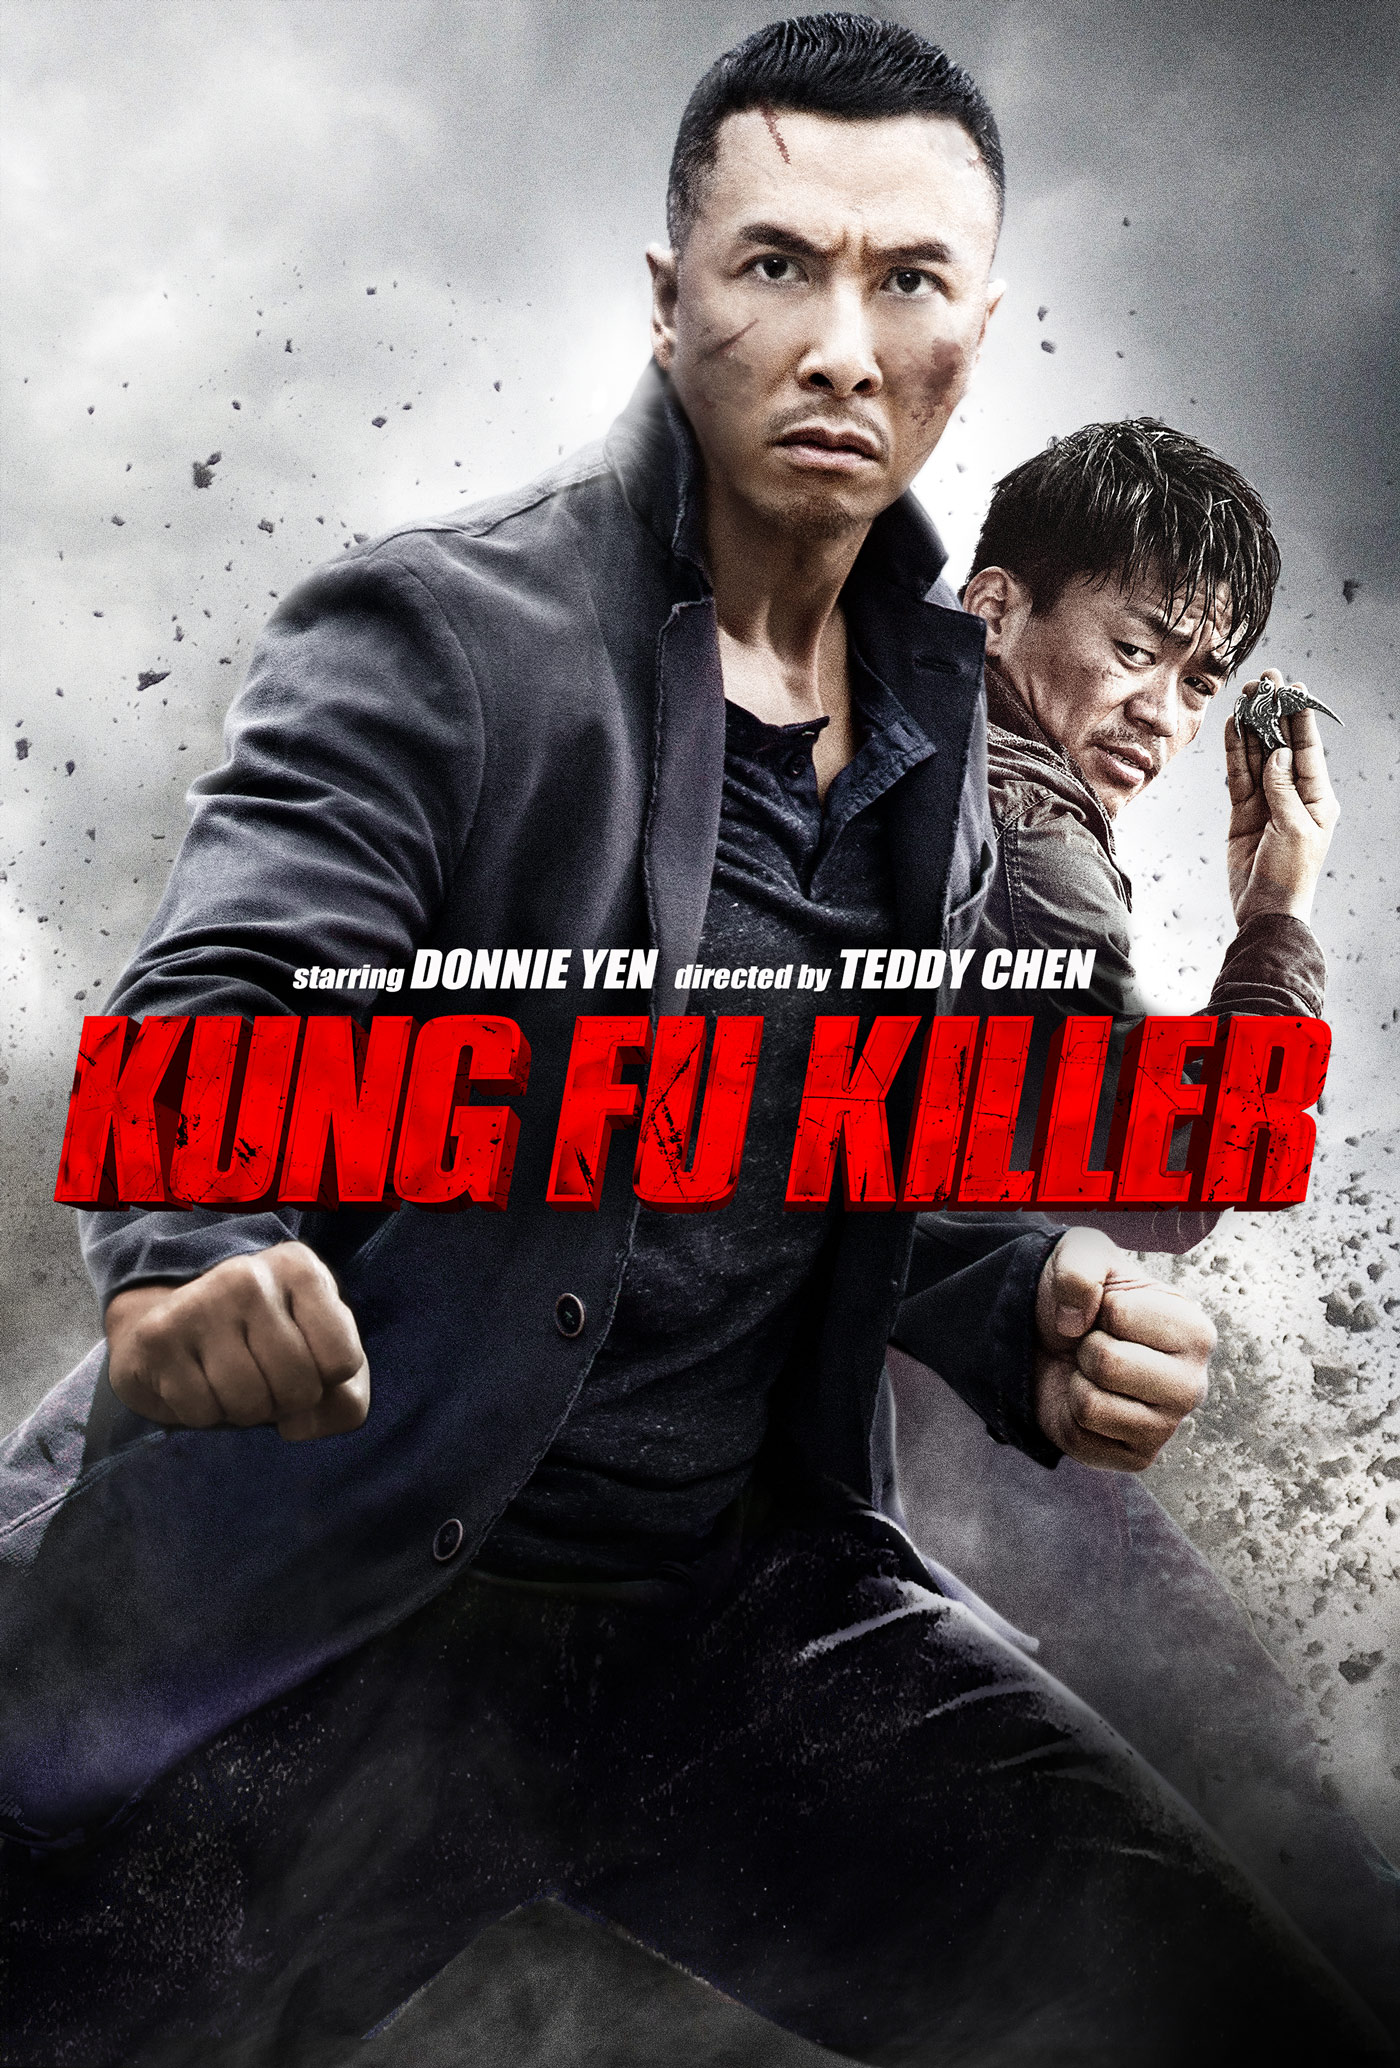 Martial arts instructor Hahou Mo is jailed for killing a man during a fight. When a few kung fu experts are murdered, Hahou Mo offers to help the police in exchange for his freedom.